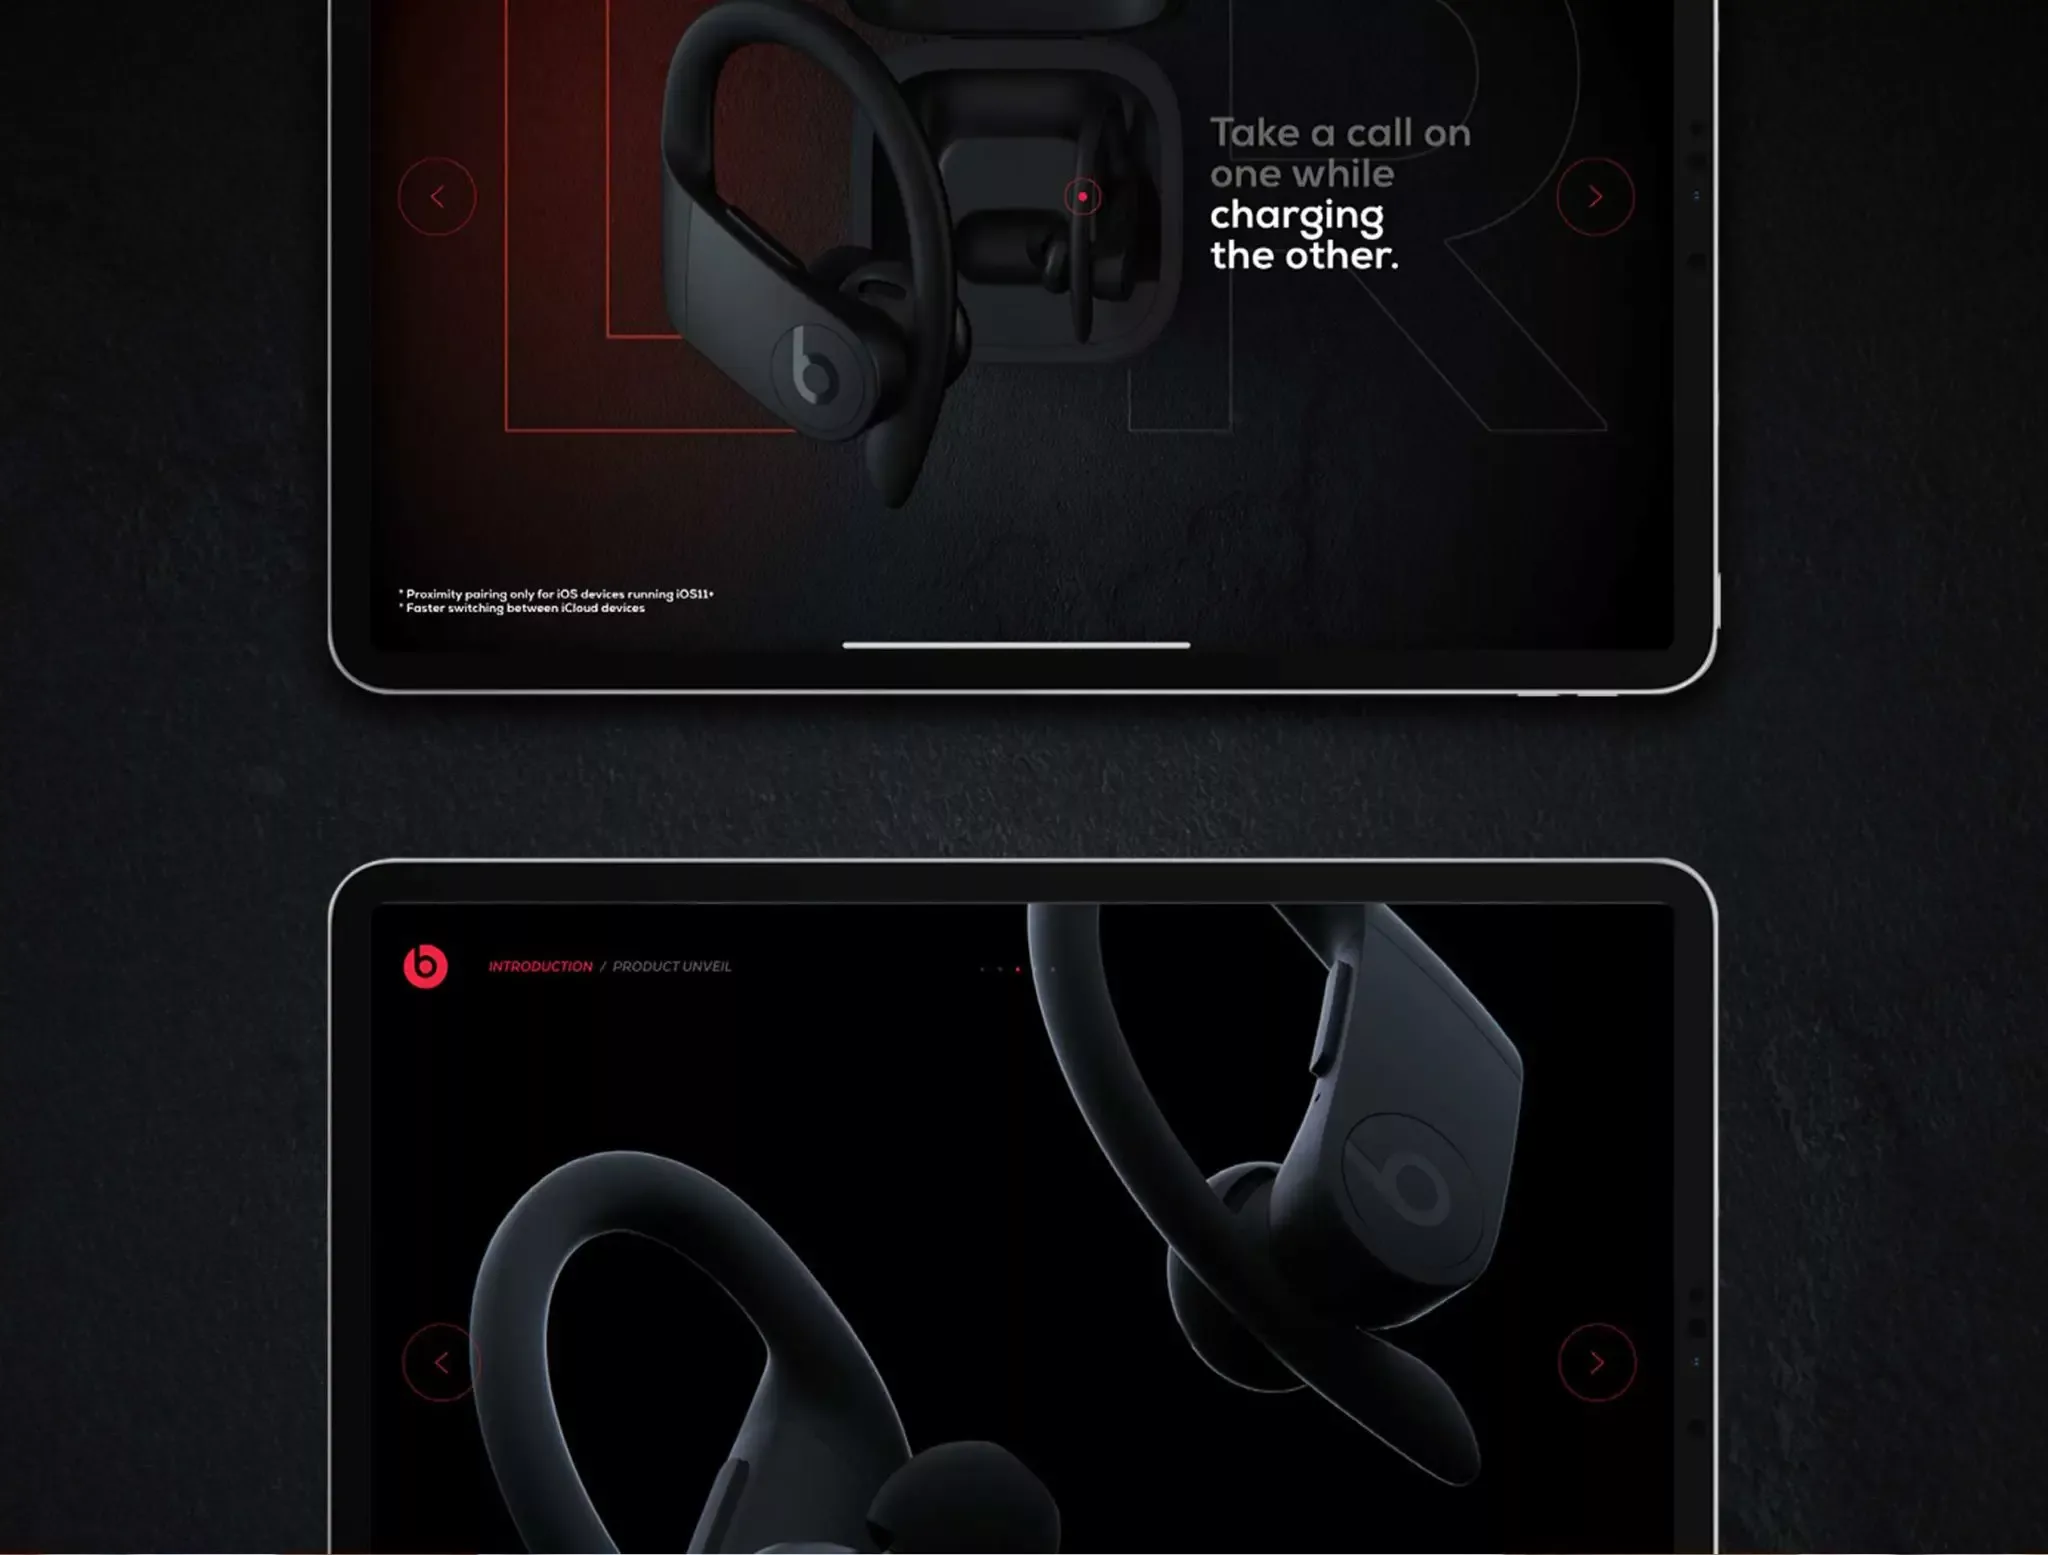 A snapshot of the Beats Tempo experience that informs the user that they can take a call on one of two headphones, while charging the other headphone.